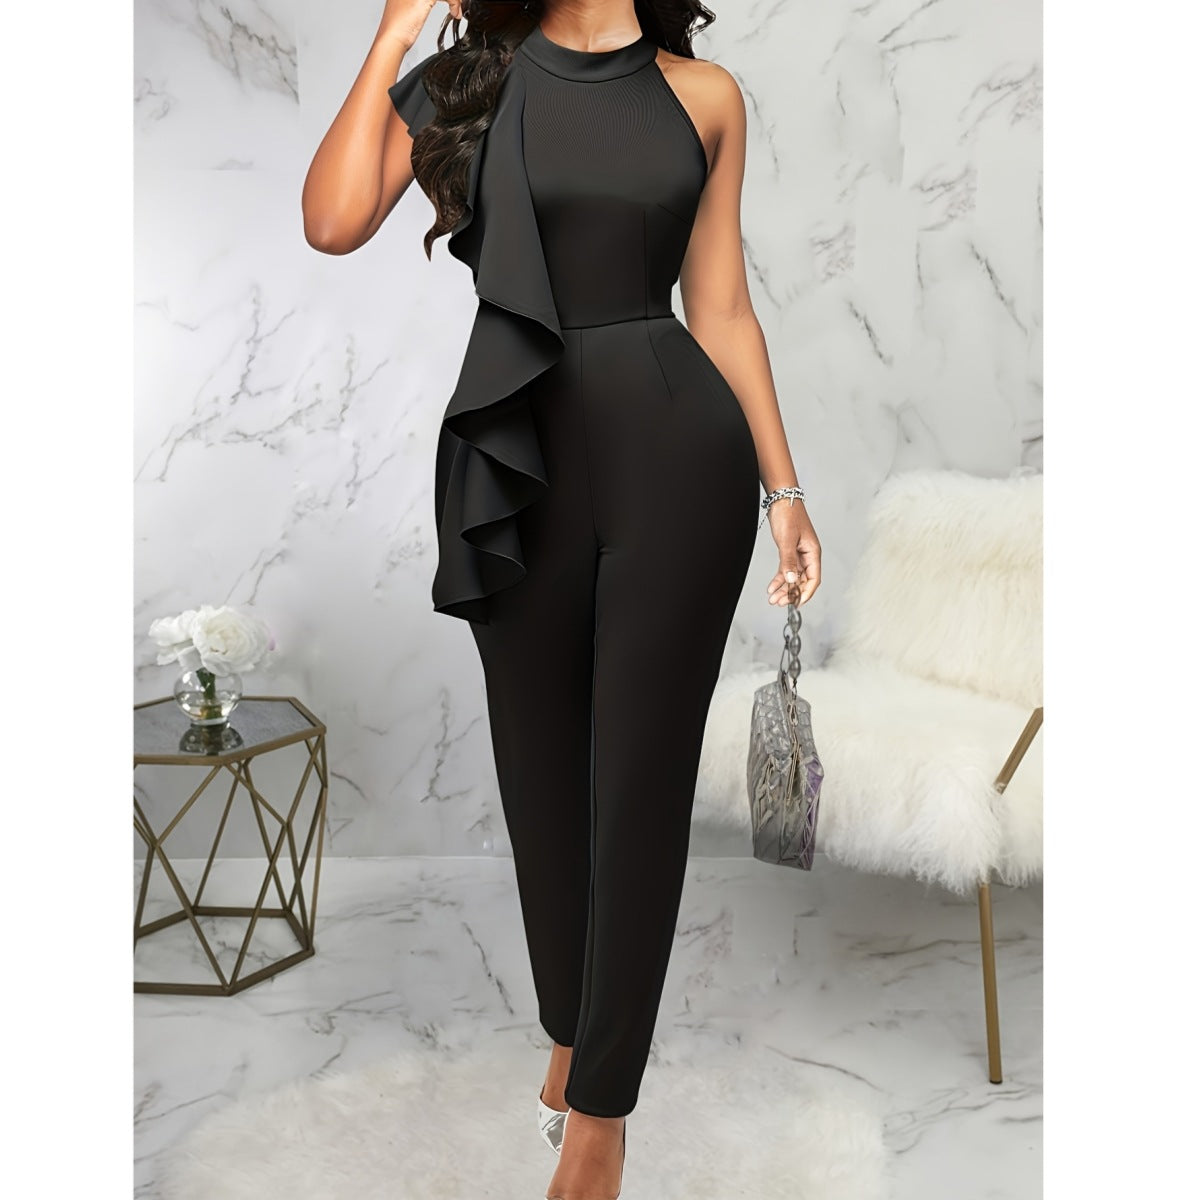 Sleeveless Summer Jumpsuit with Casual Pure Color and Ruffled Design for Women